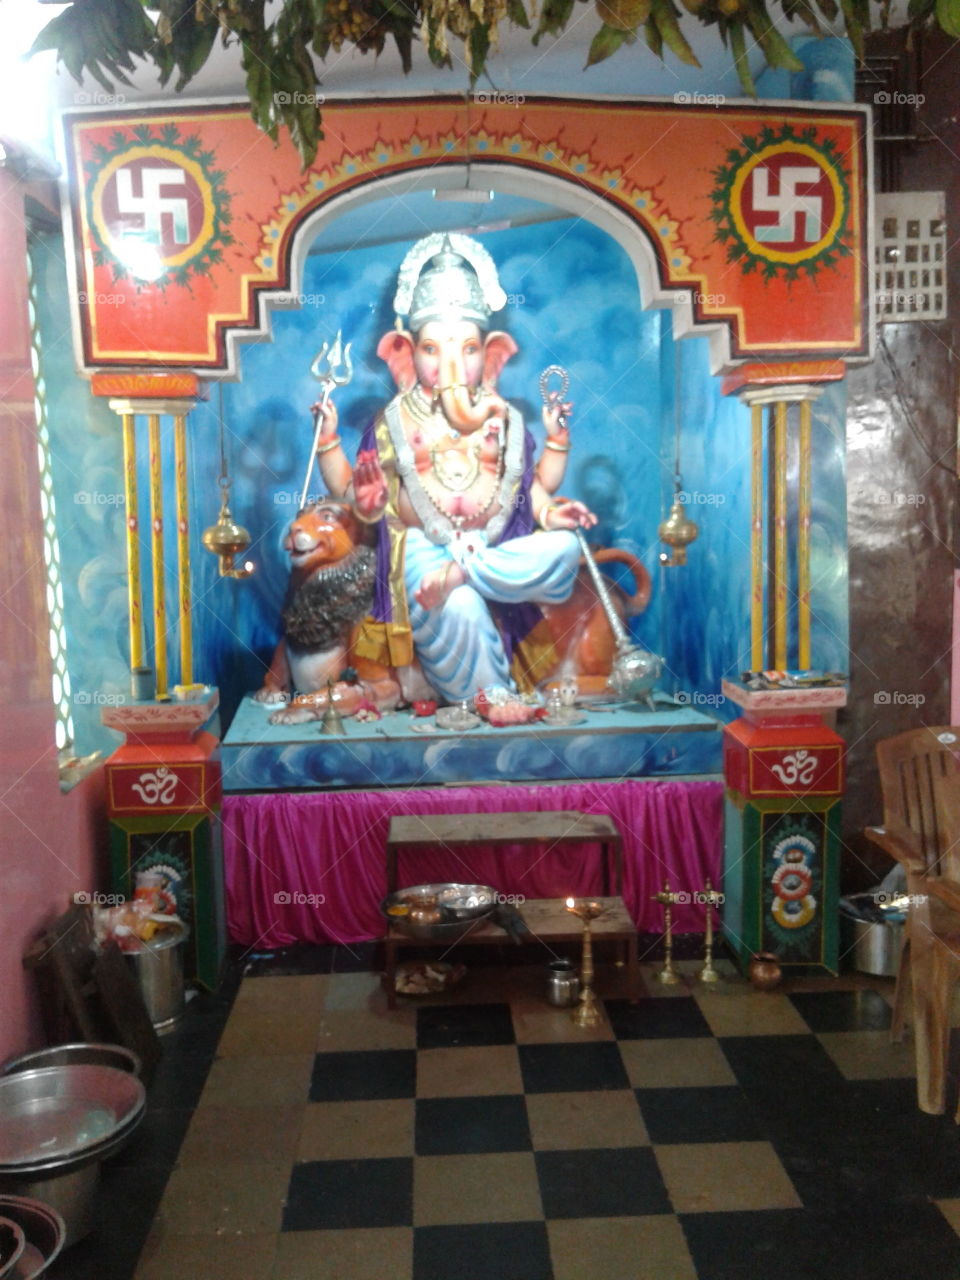 Lord ganesha statue and decorations for festival